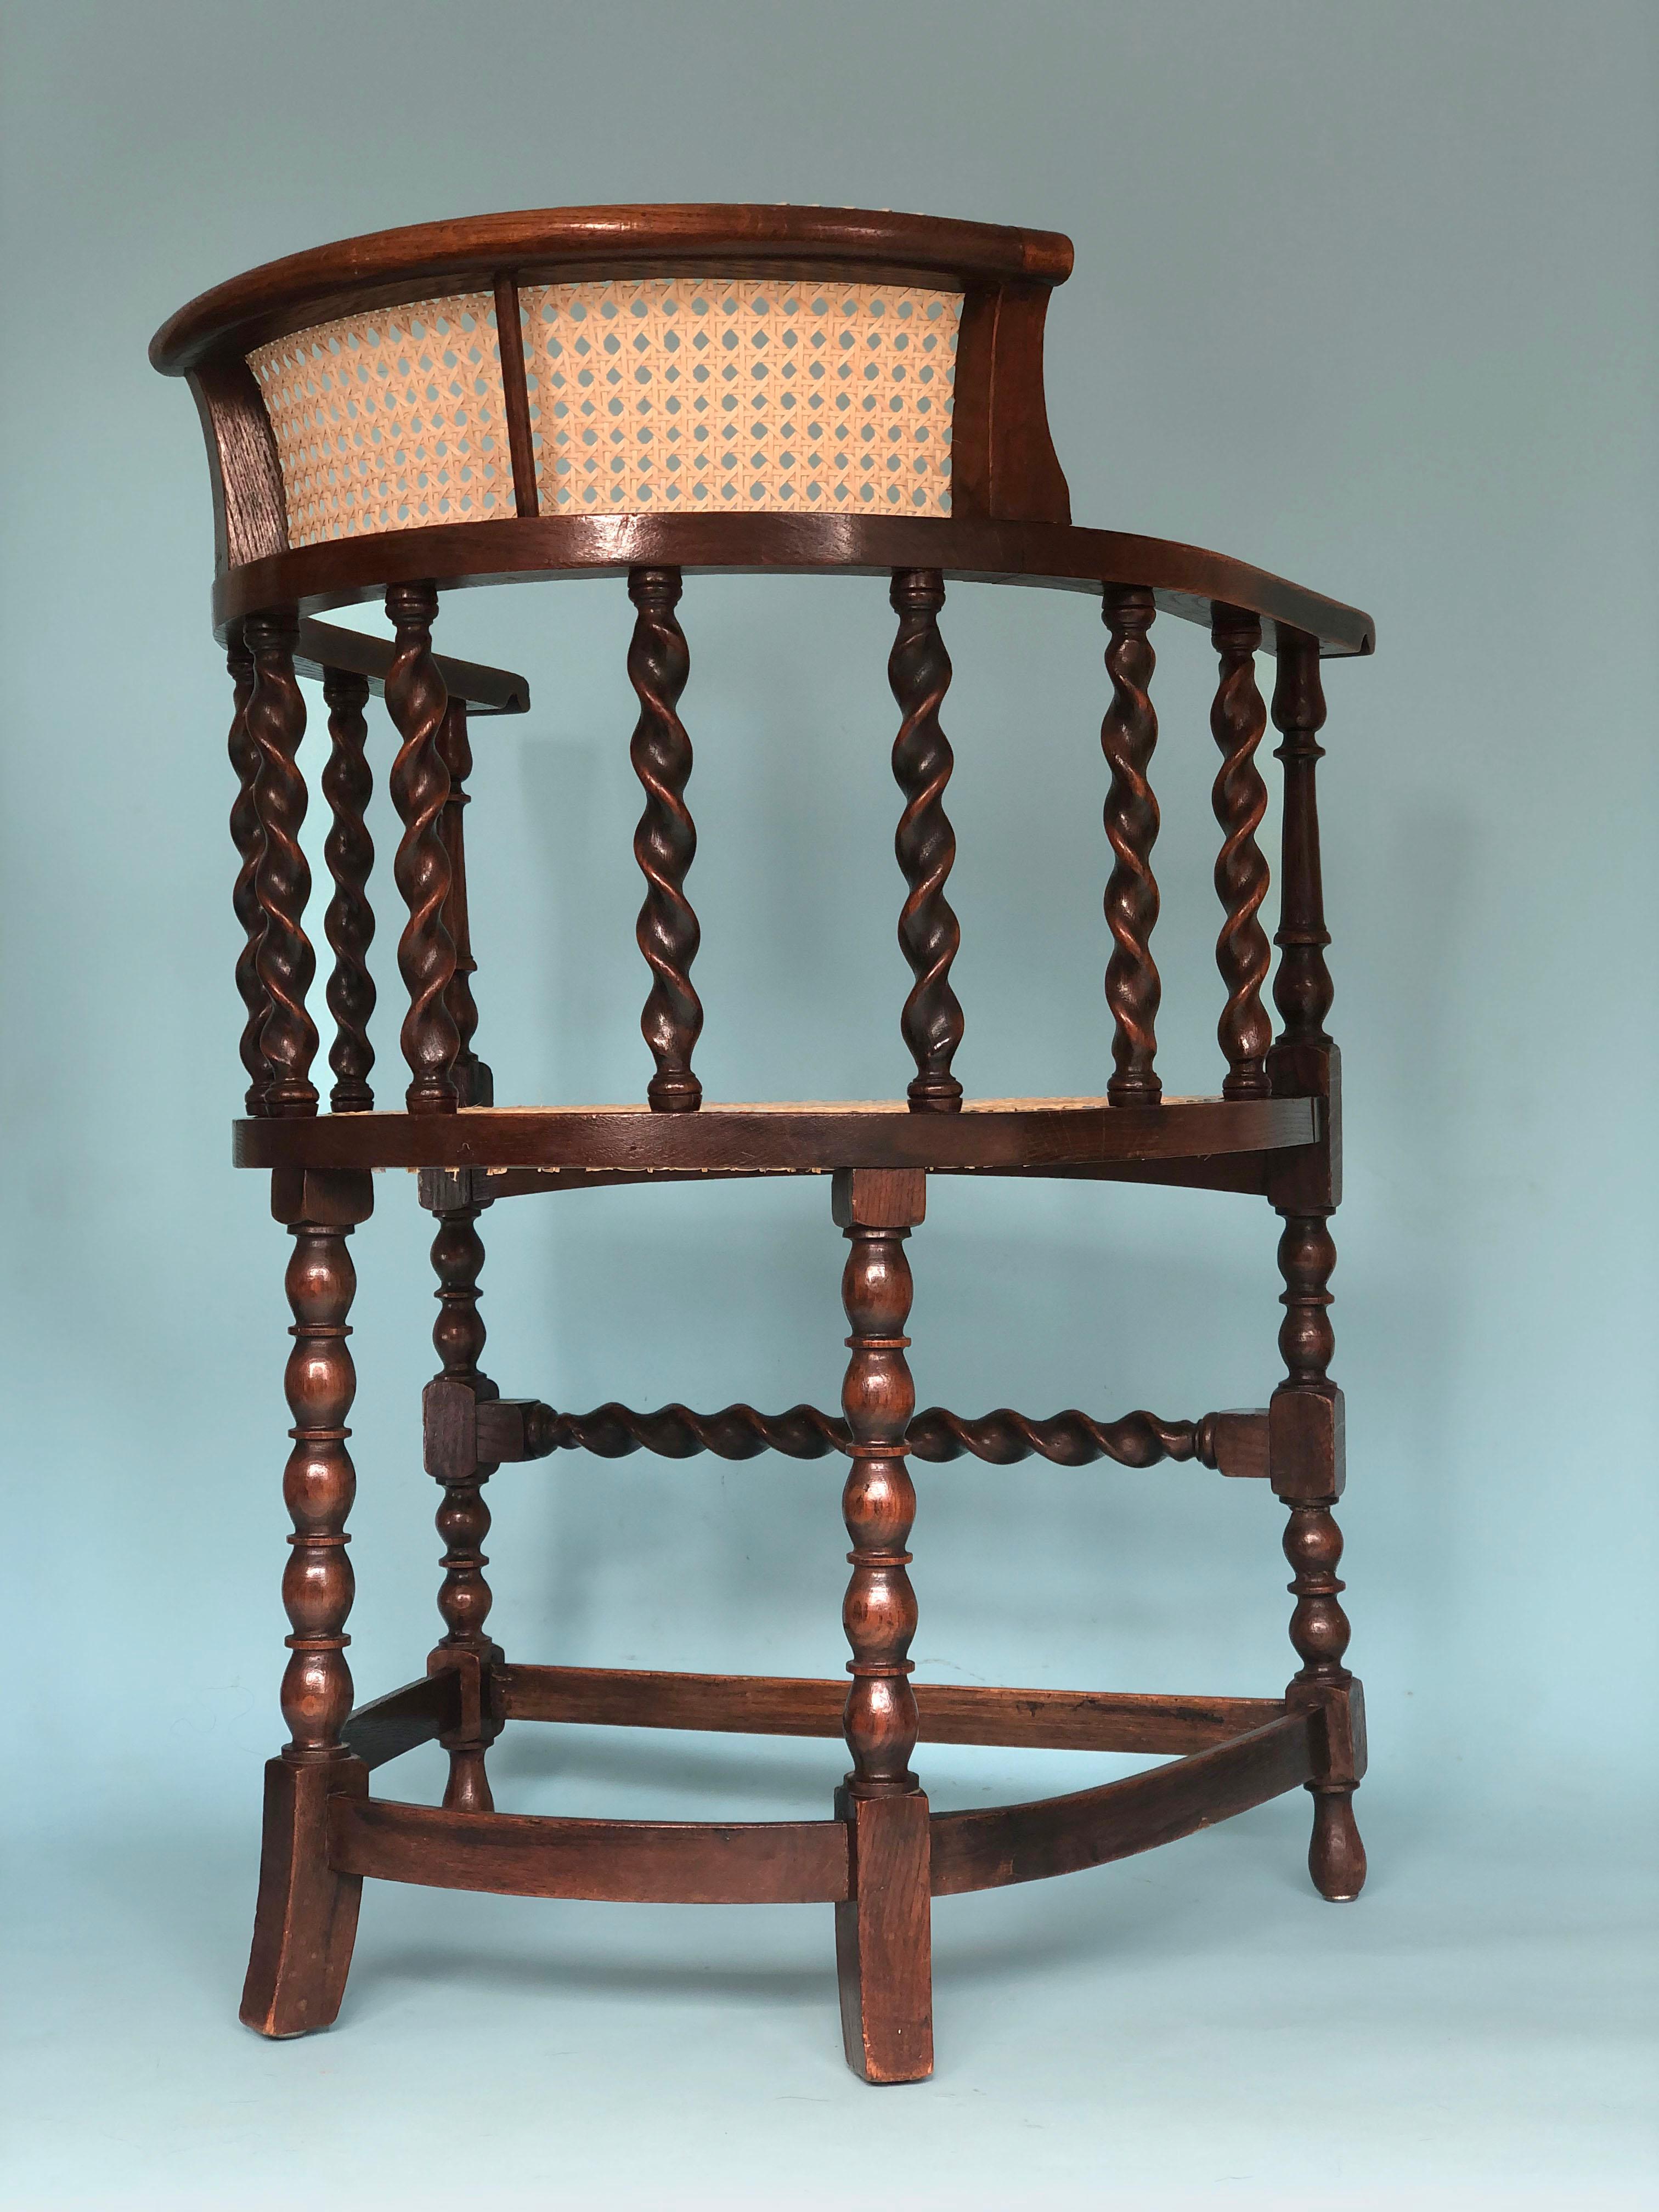 An English corner chair with barley twist supports and bobbin turned legs from around 1900. The beech wood chair is in very good condition. The cane seat is from a later period. 

Object: Armchair
Designer: Unknown
Style: Antique
Period: